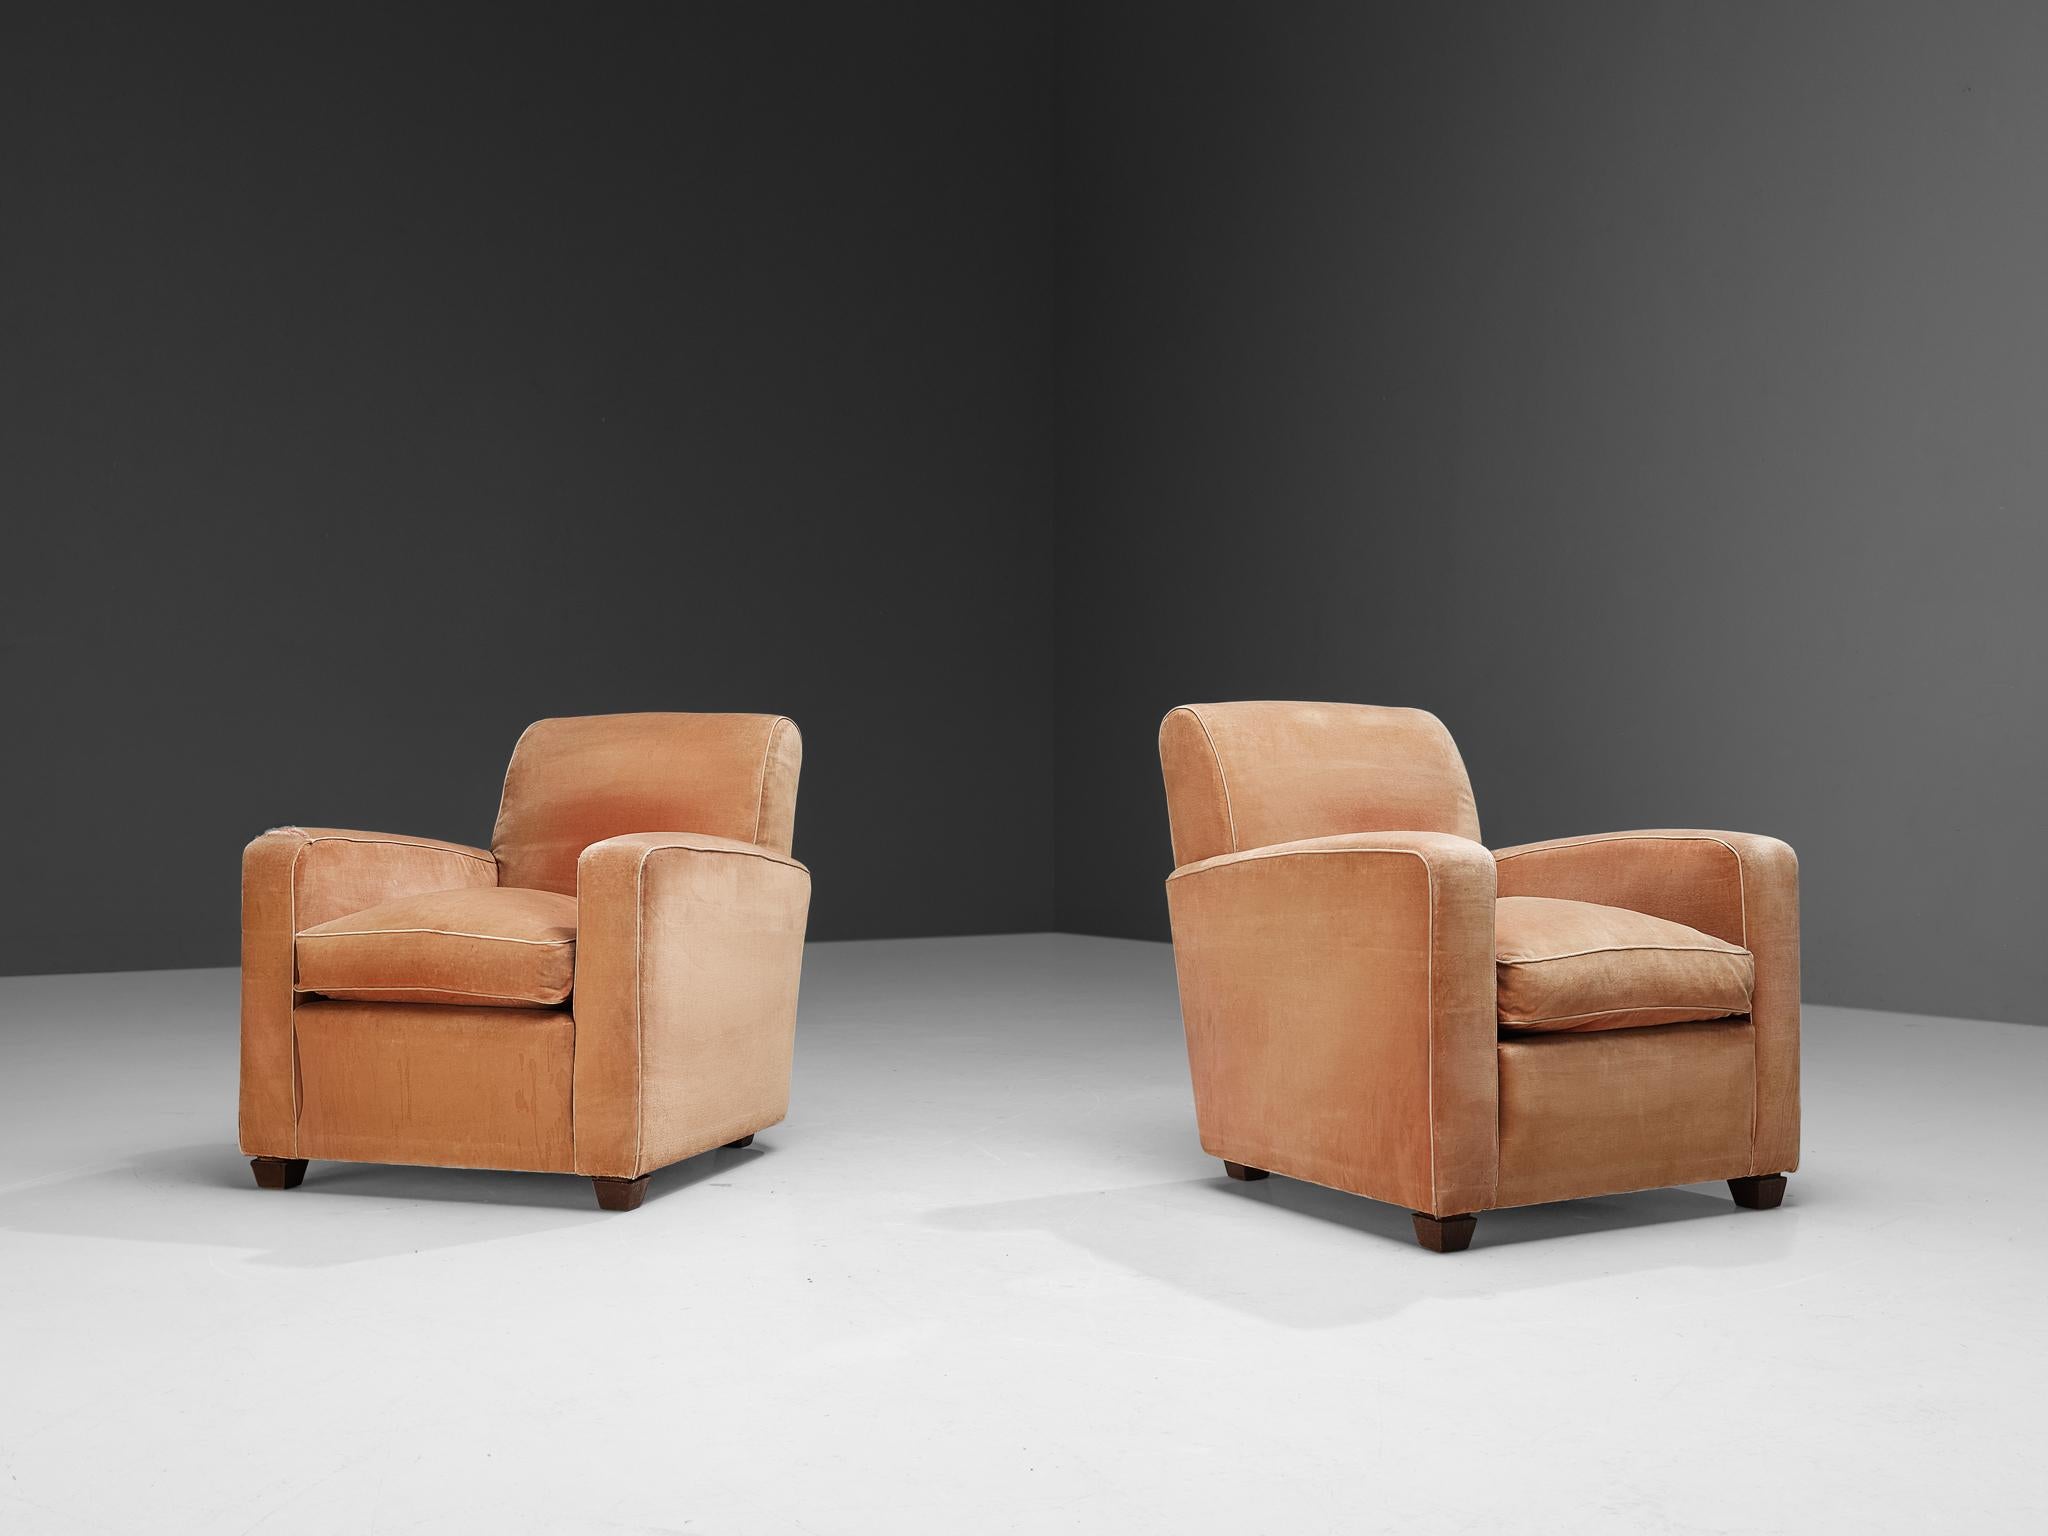 Guglielmo Ulrich, pair of lounge chairs, oak, velvet upholstery, Italy, 1940s
 
Guglielmo Ulrich, an Italian influential designer and architect of the 1940s-1960s, designed this pair of comfortable lounge chairs with a great eye for proportions. The